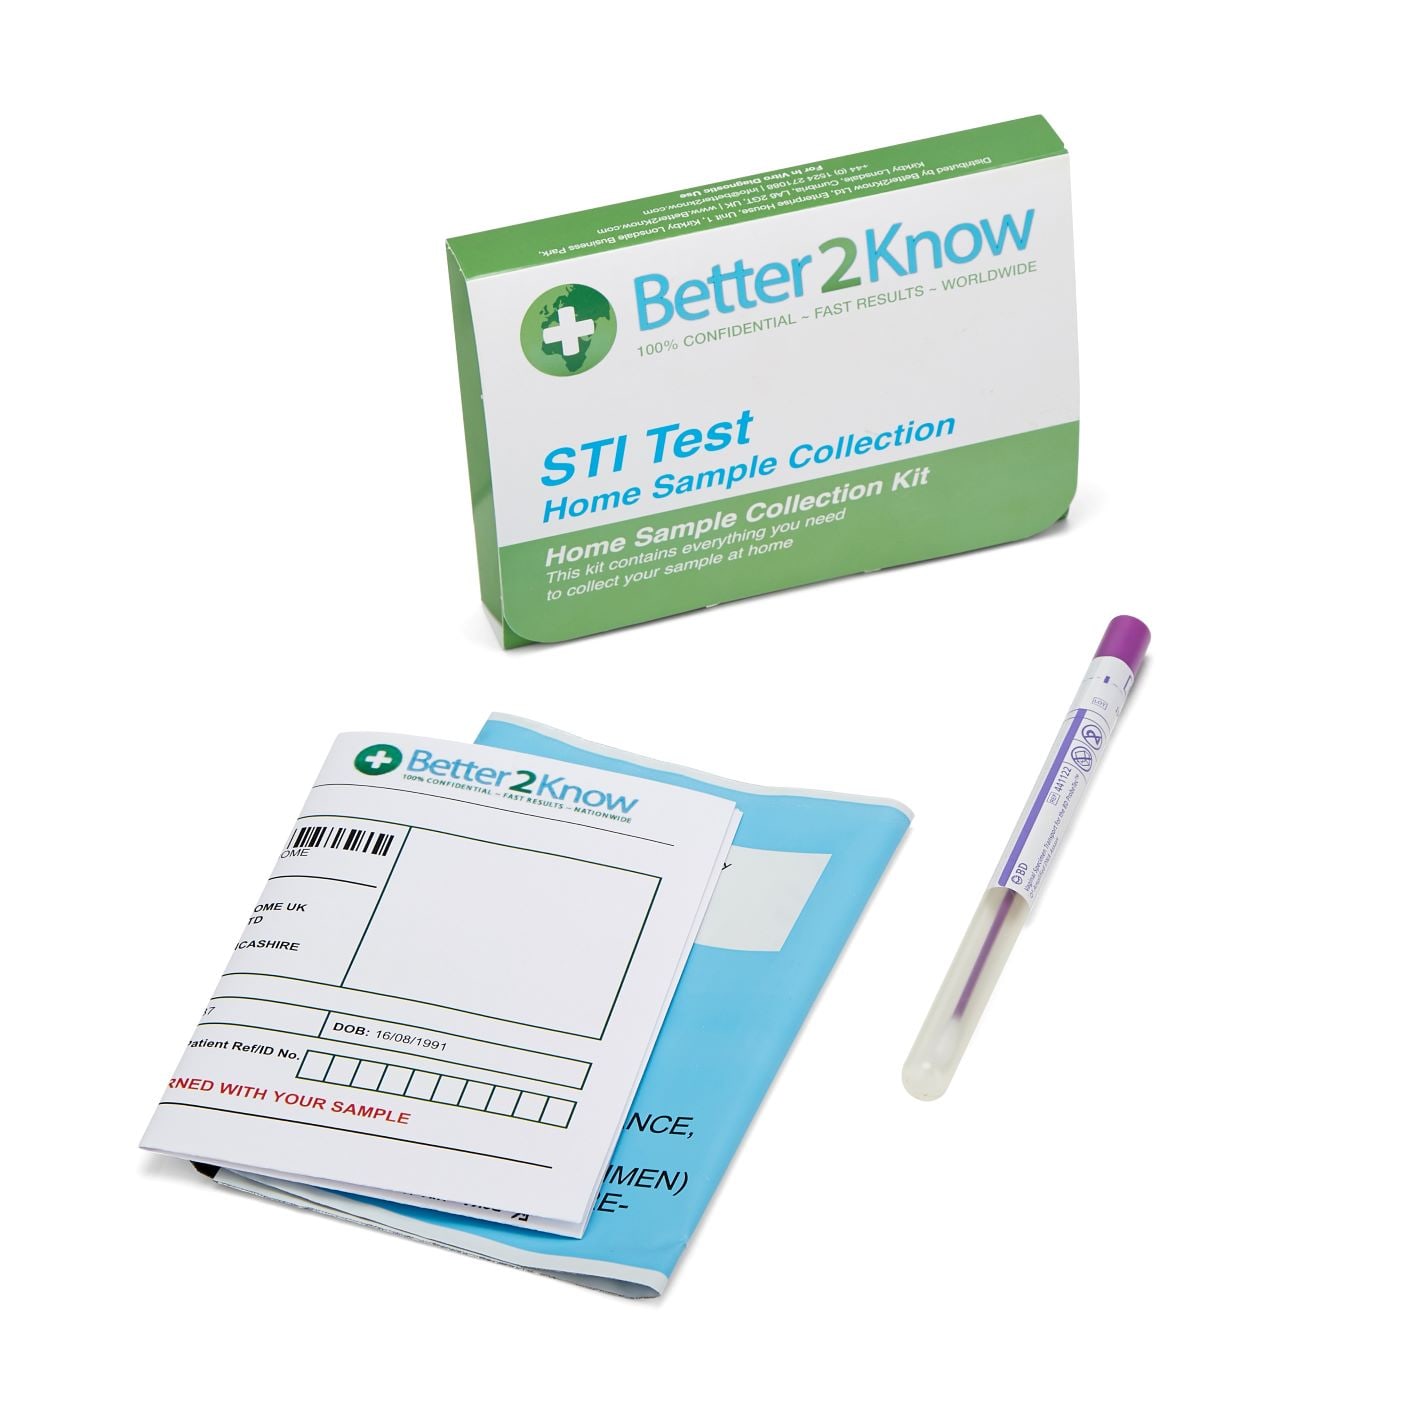 Better2Know&#039;s HPV test can detect 14 high-risk types.